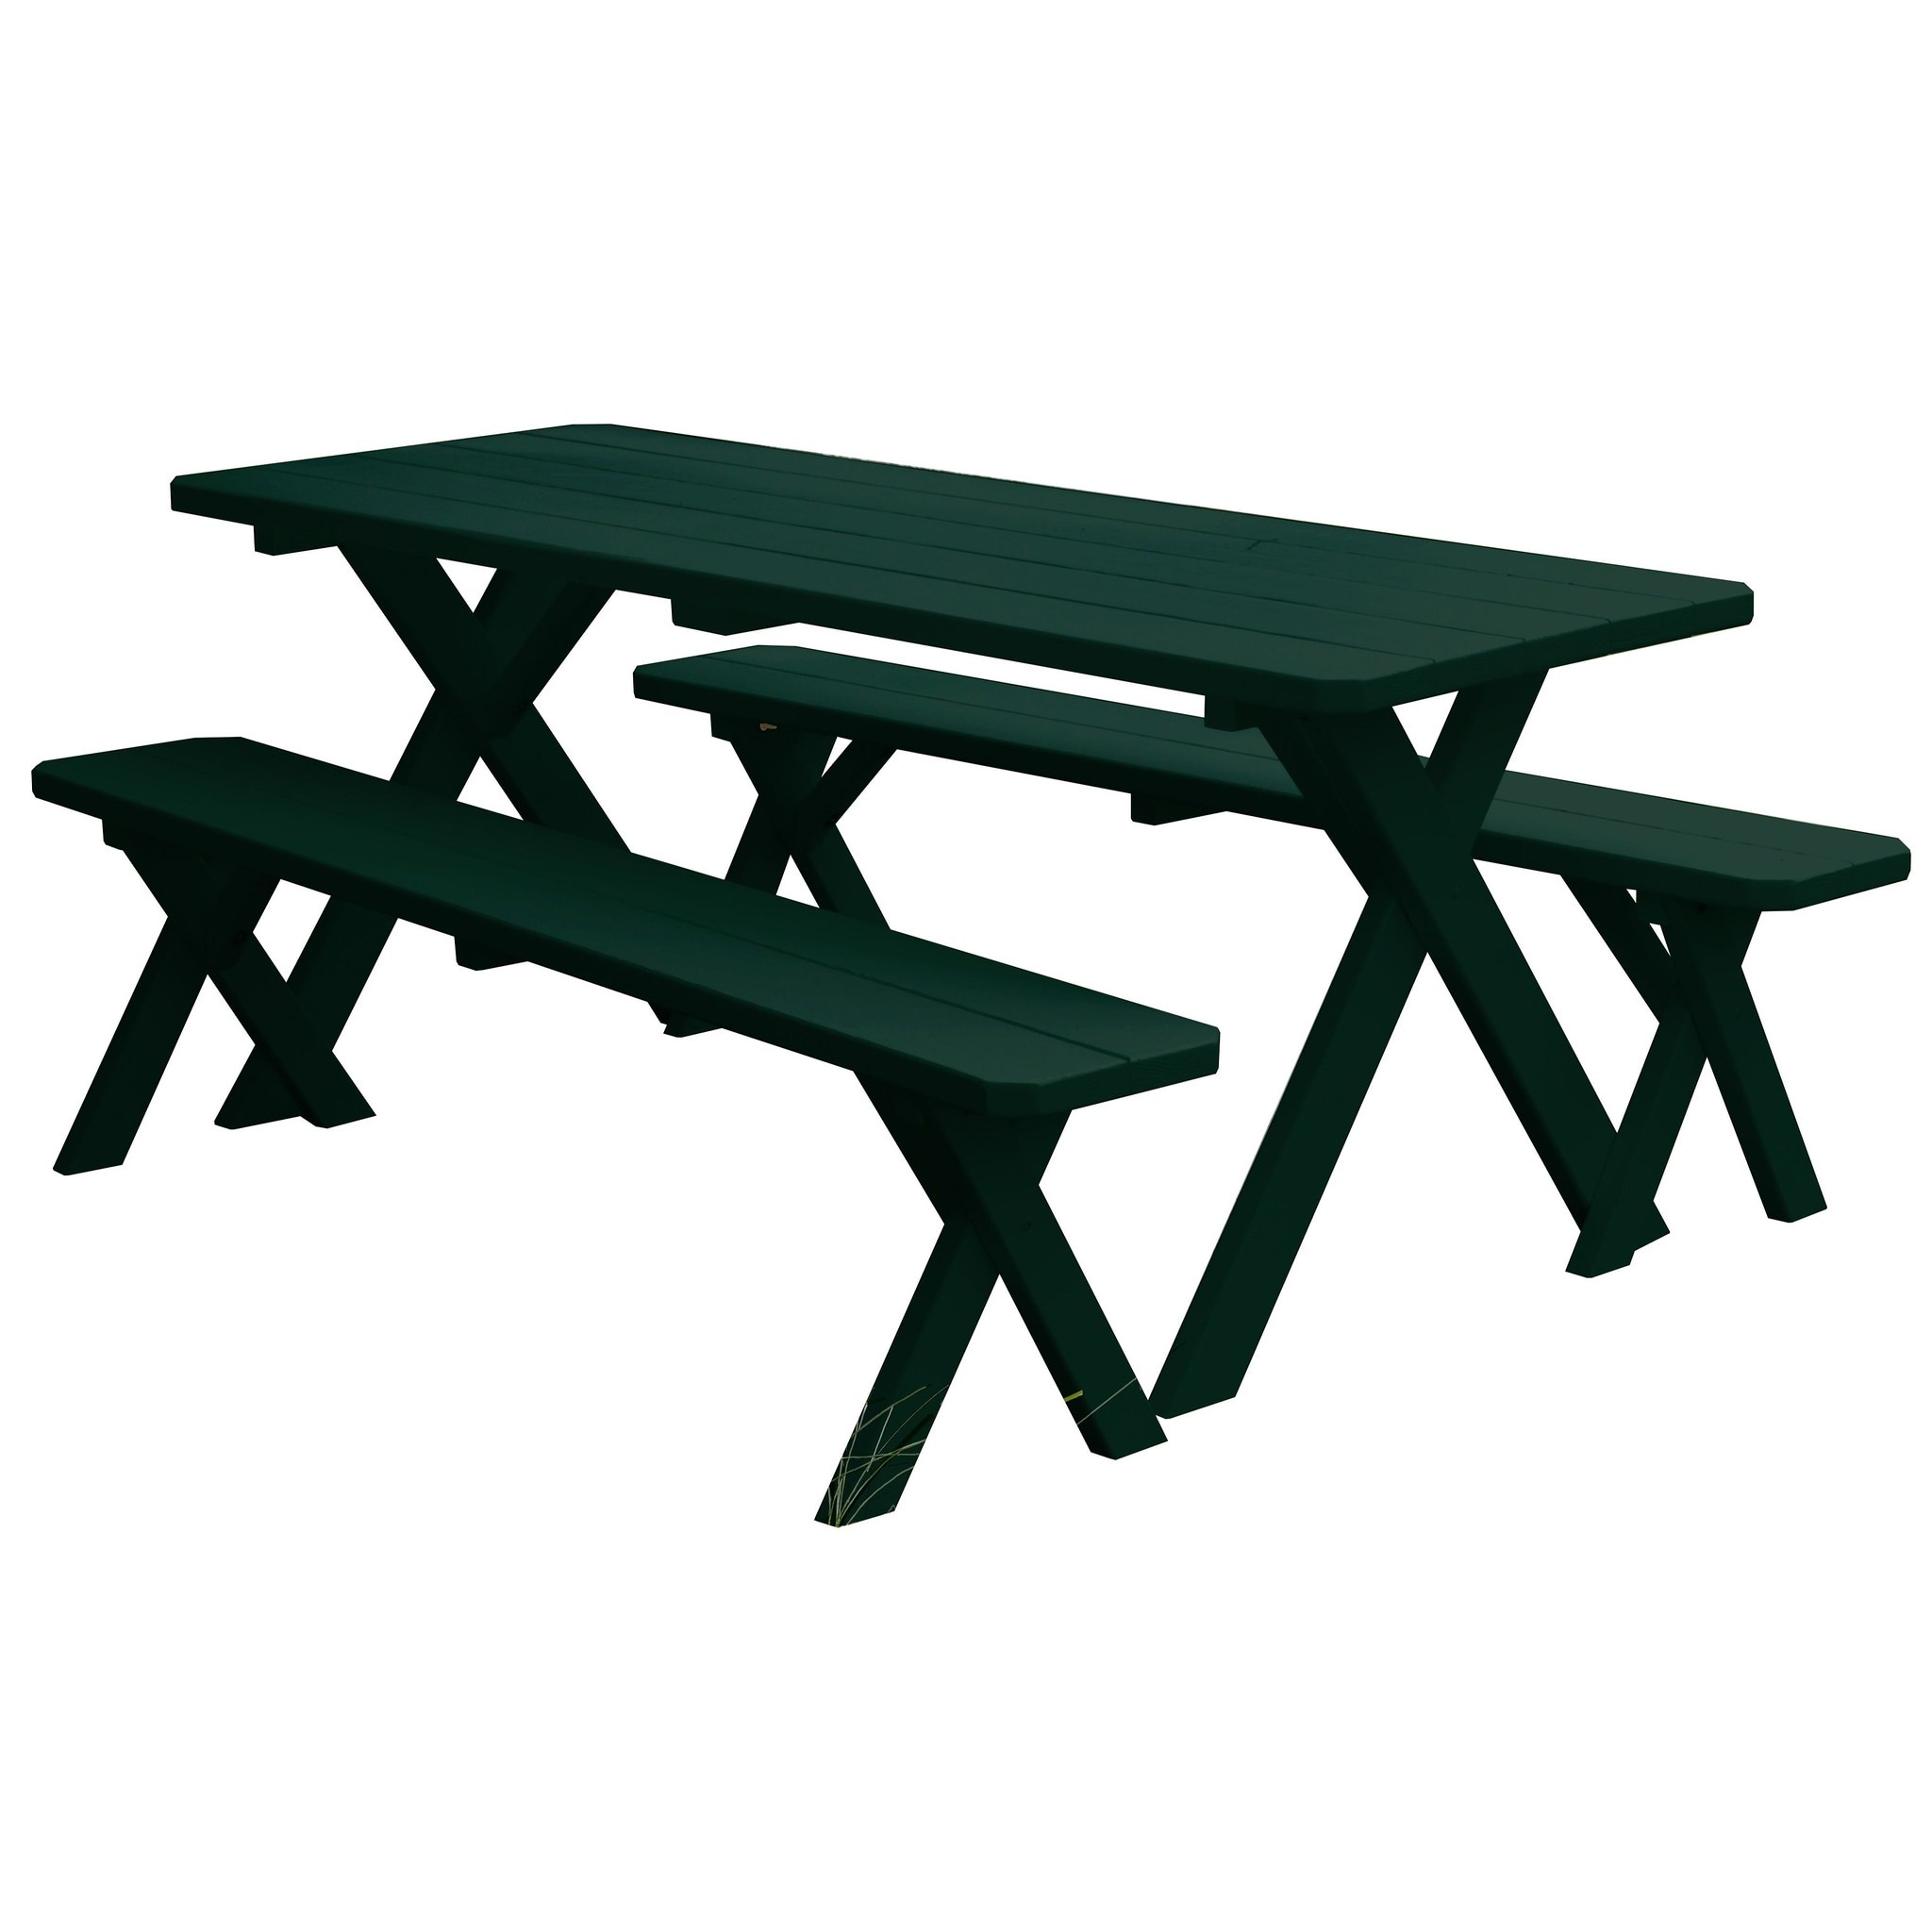 Pine 6 Cross-leg Picnic Table With 2 Benches